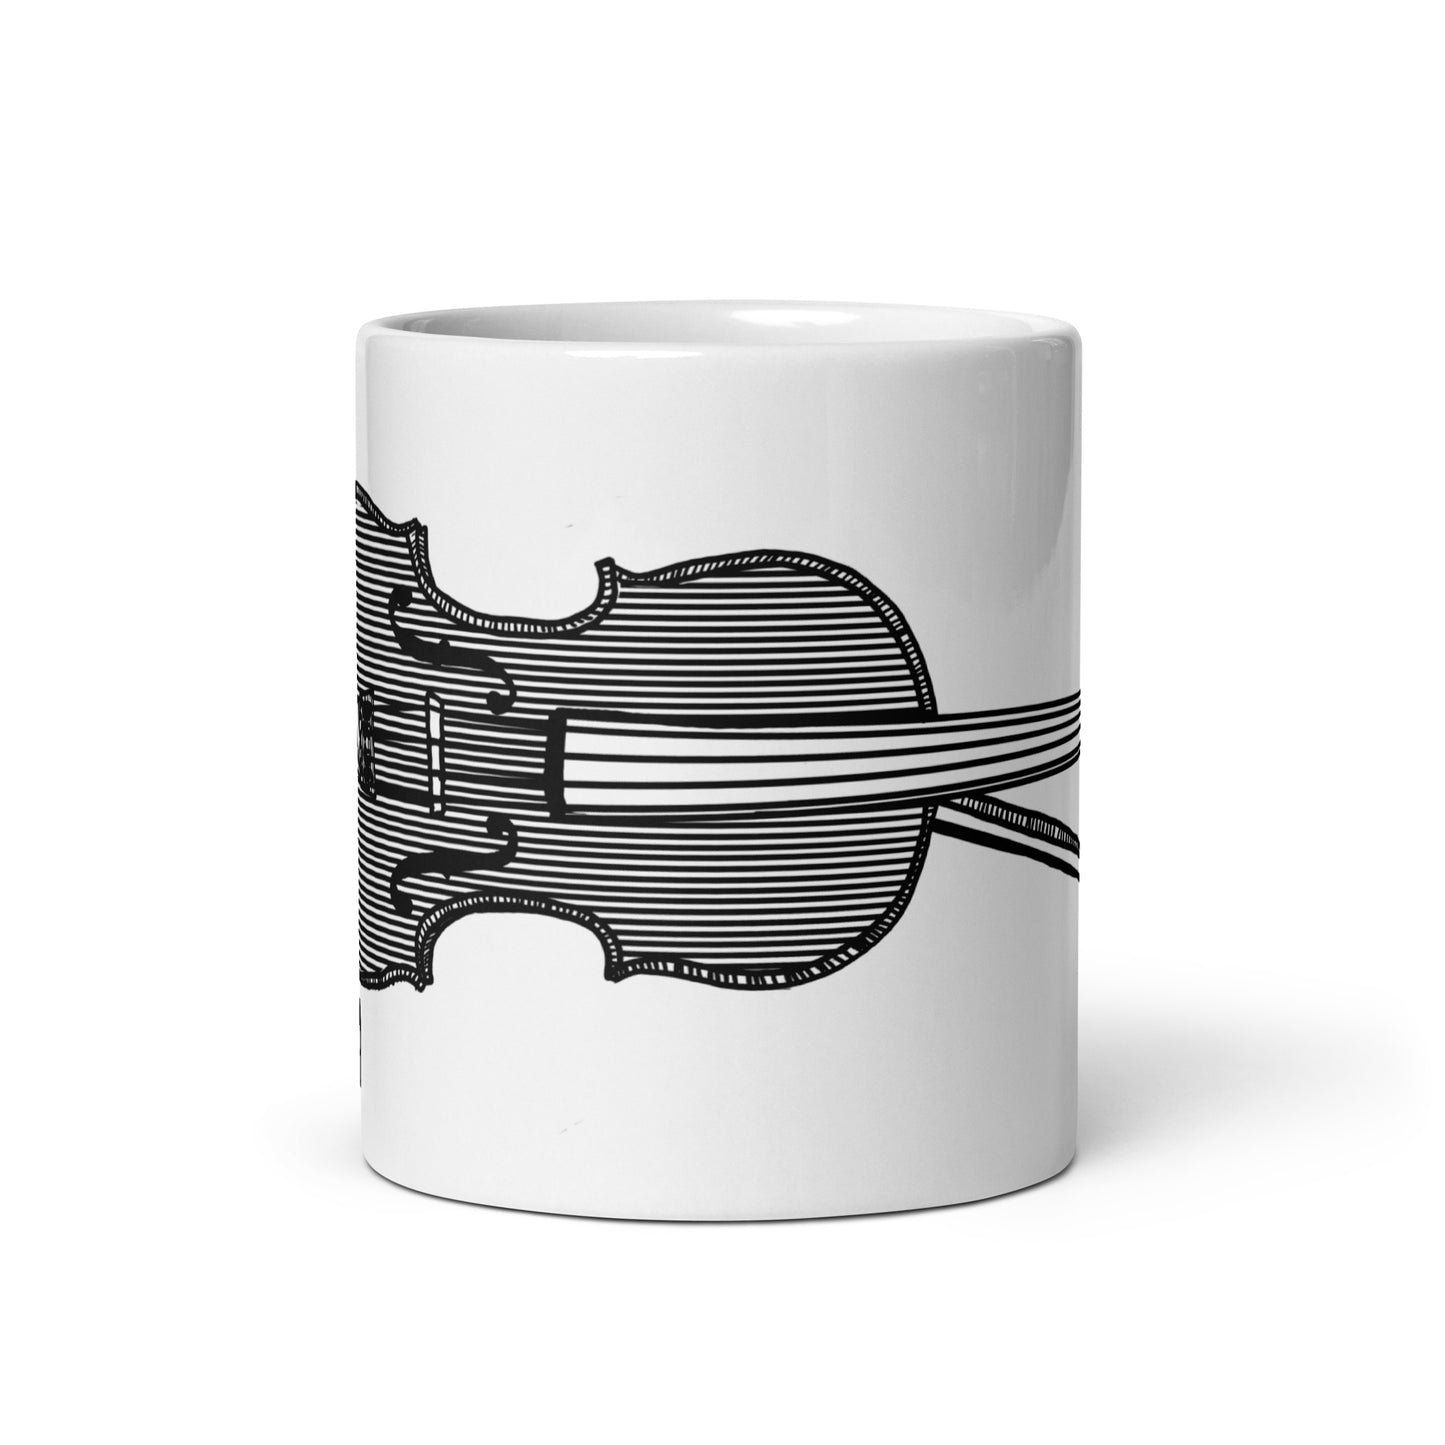 BellavanceInk: Coffee Mug With A Vintage Old Time Fiddle/Violin Musical Instrument Pen And Ink Drawing